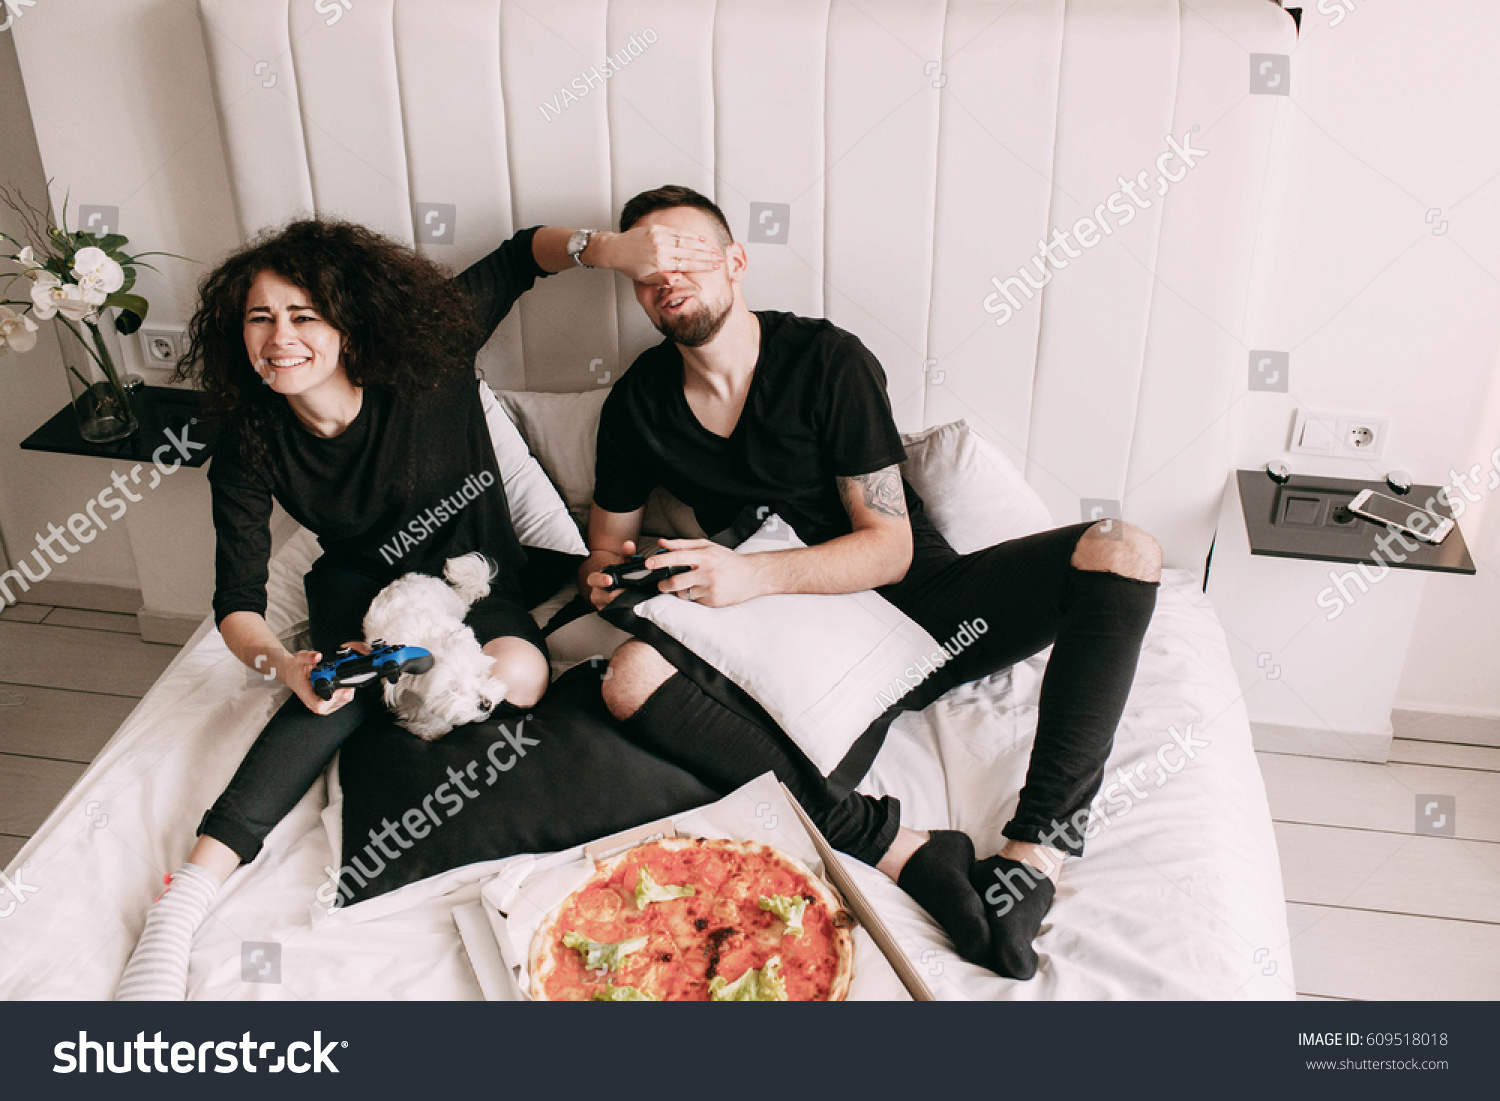 Girl closes man's eyes while they play PS #609518018